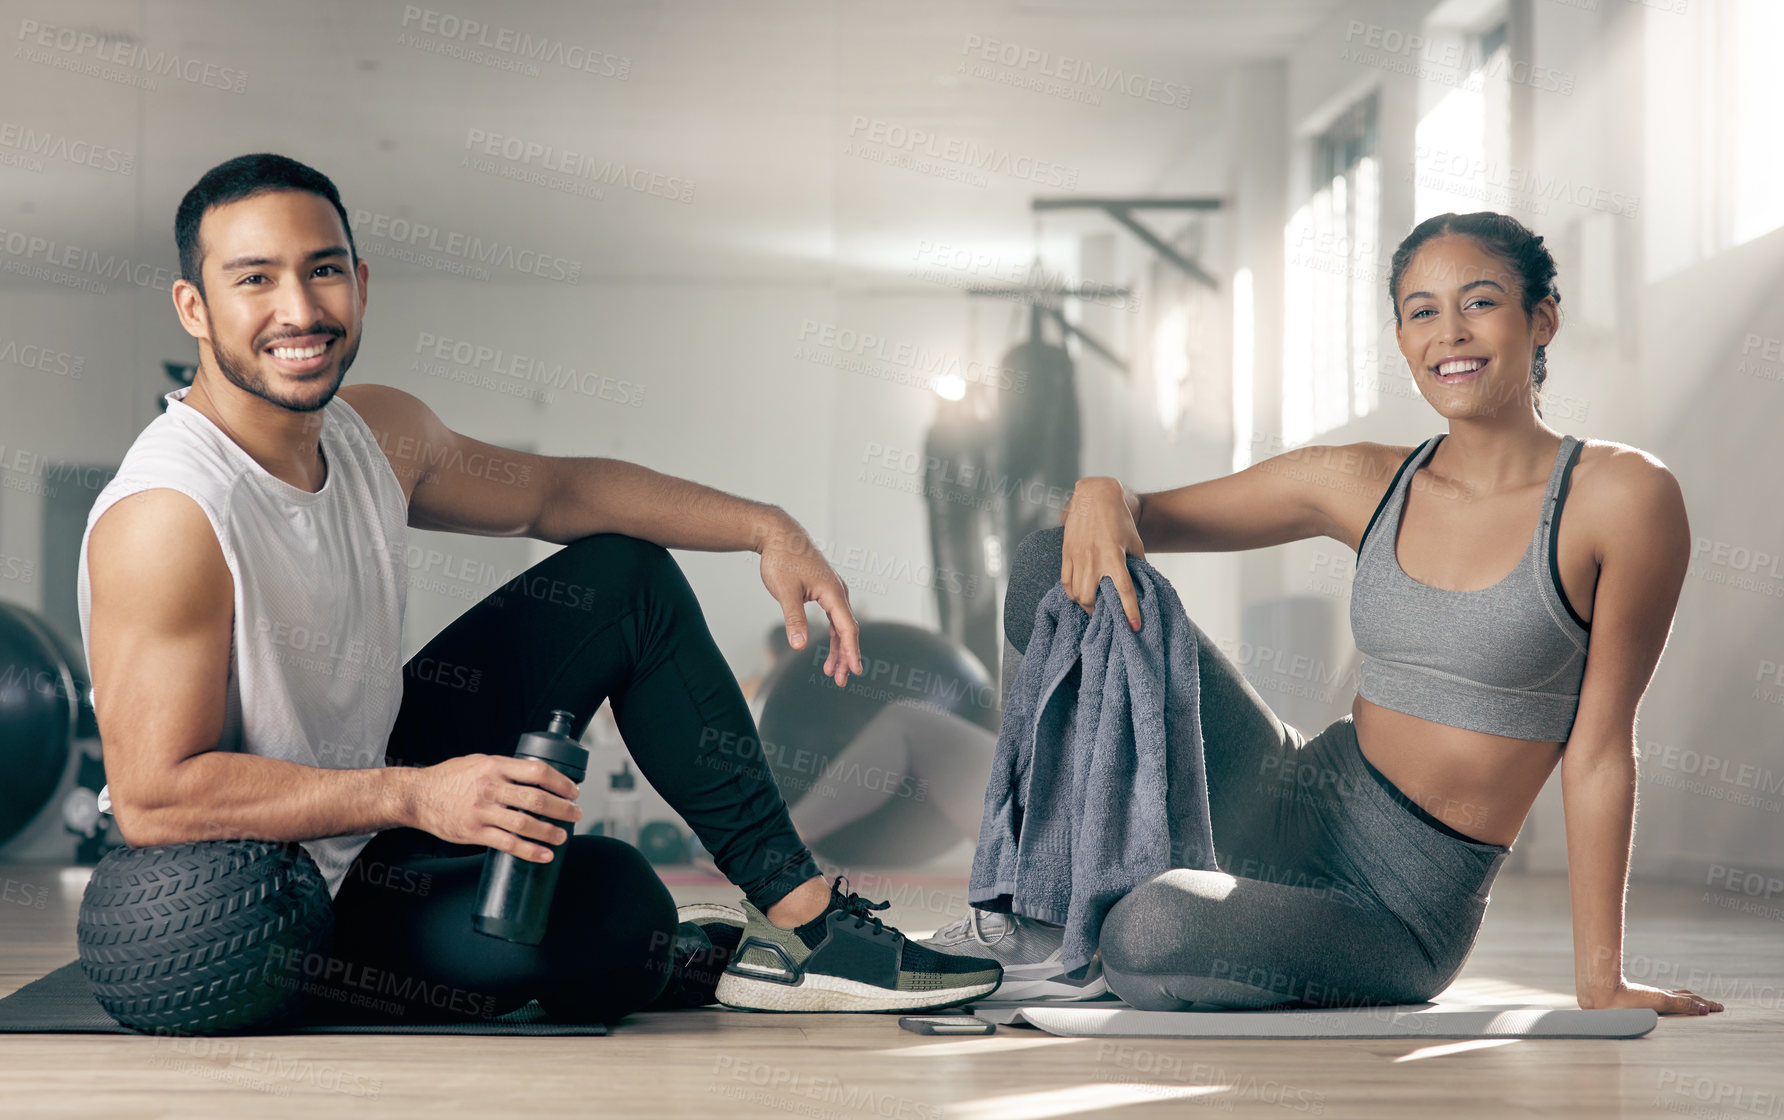 Buy stock photo Shot of two young athletes sitting together at the gym